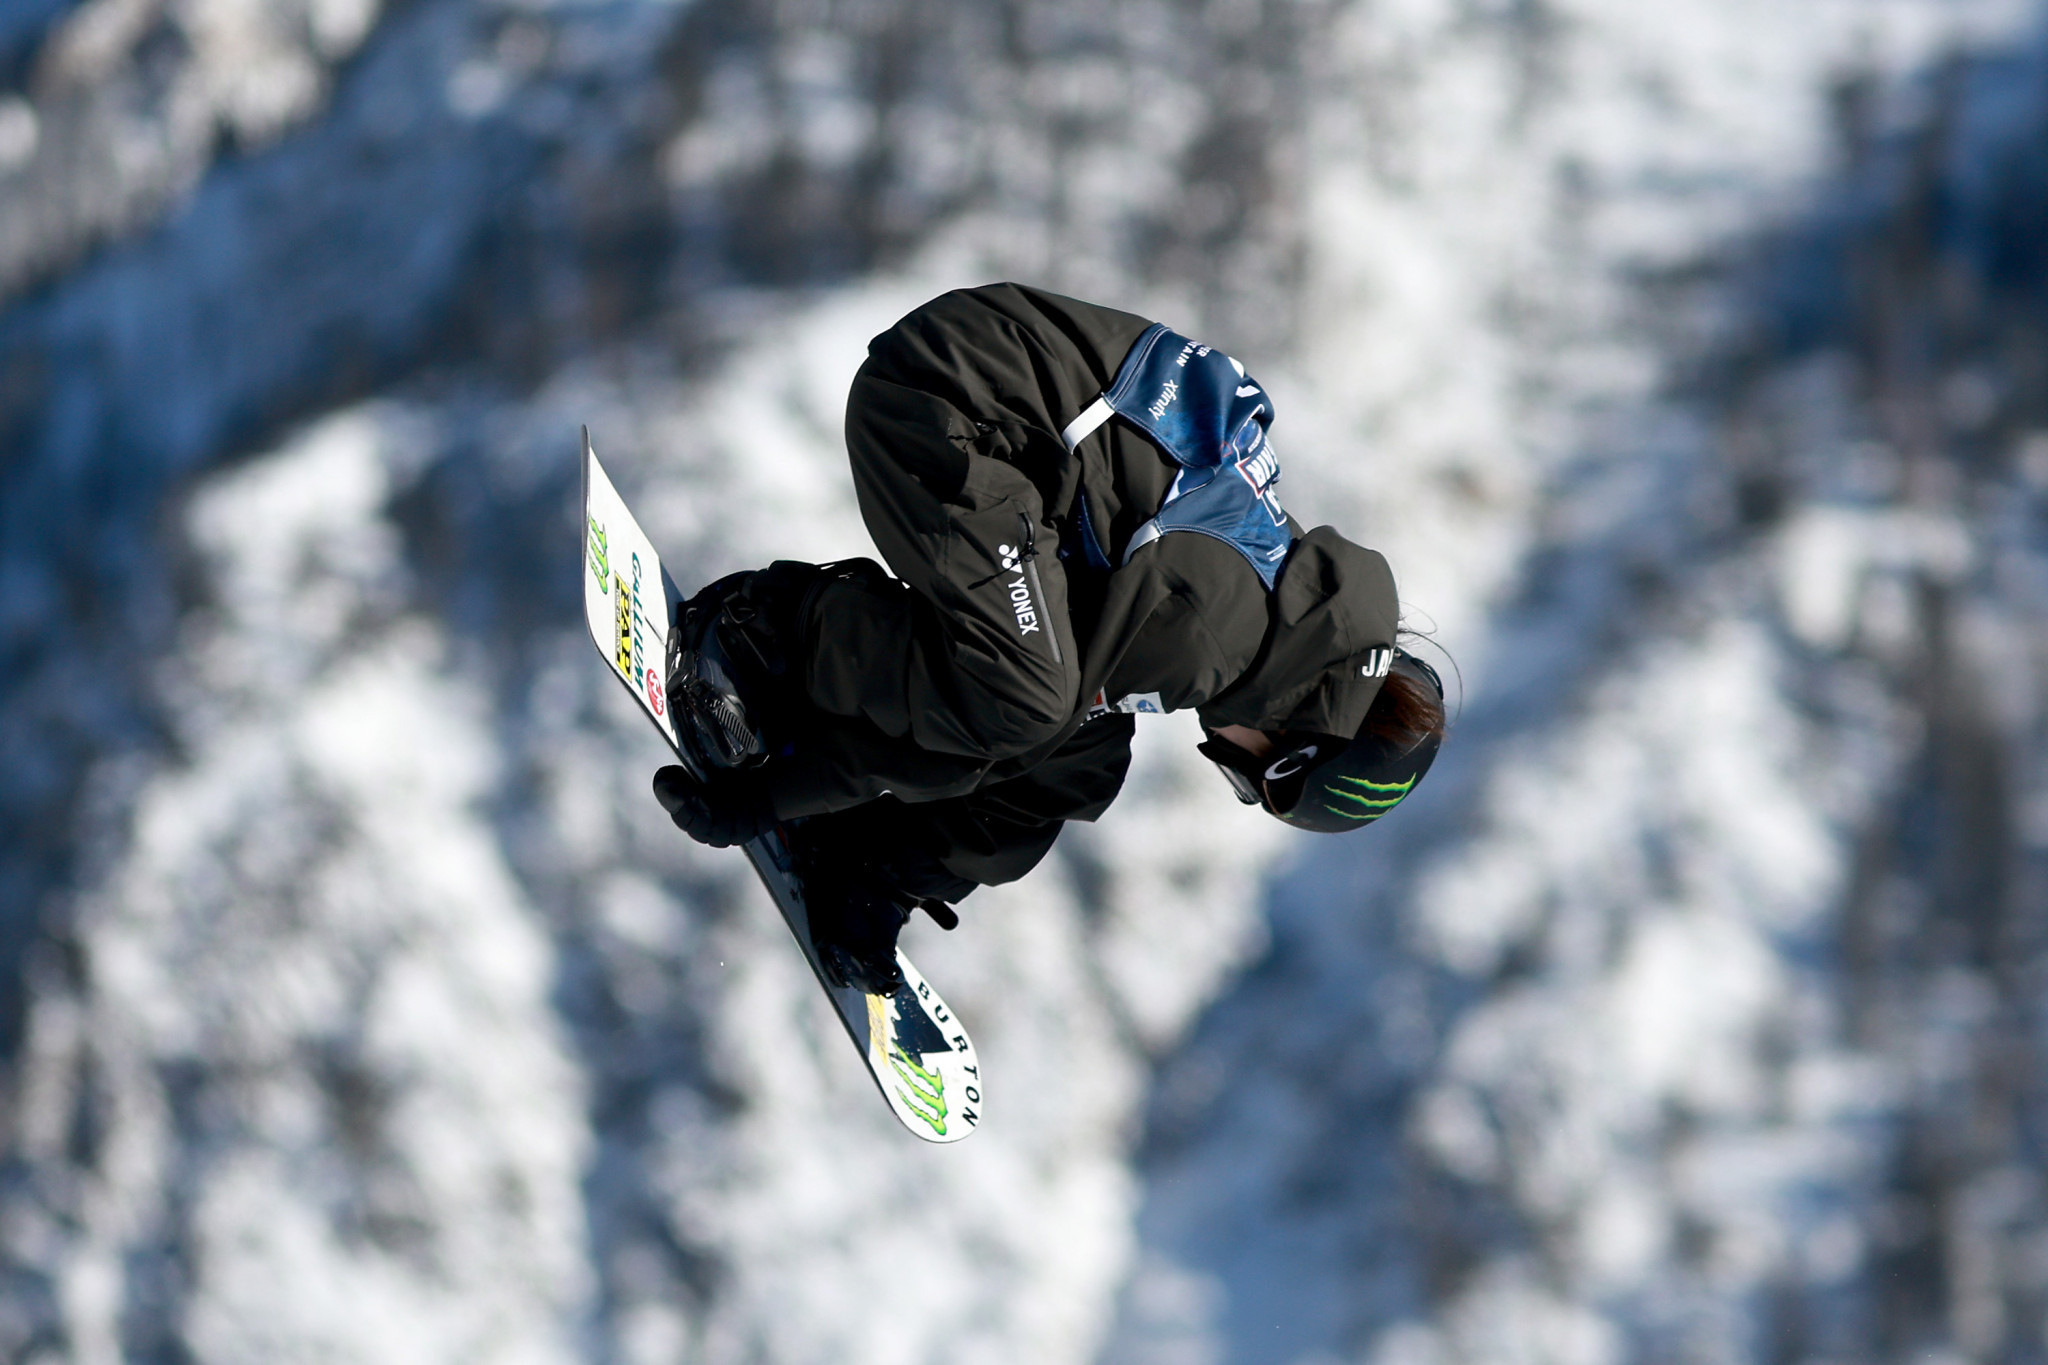 Kokomo and Hiroto stand out as Japan dominate FIS Snowboard World Cup